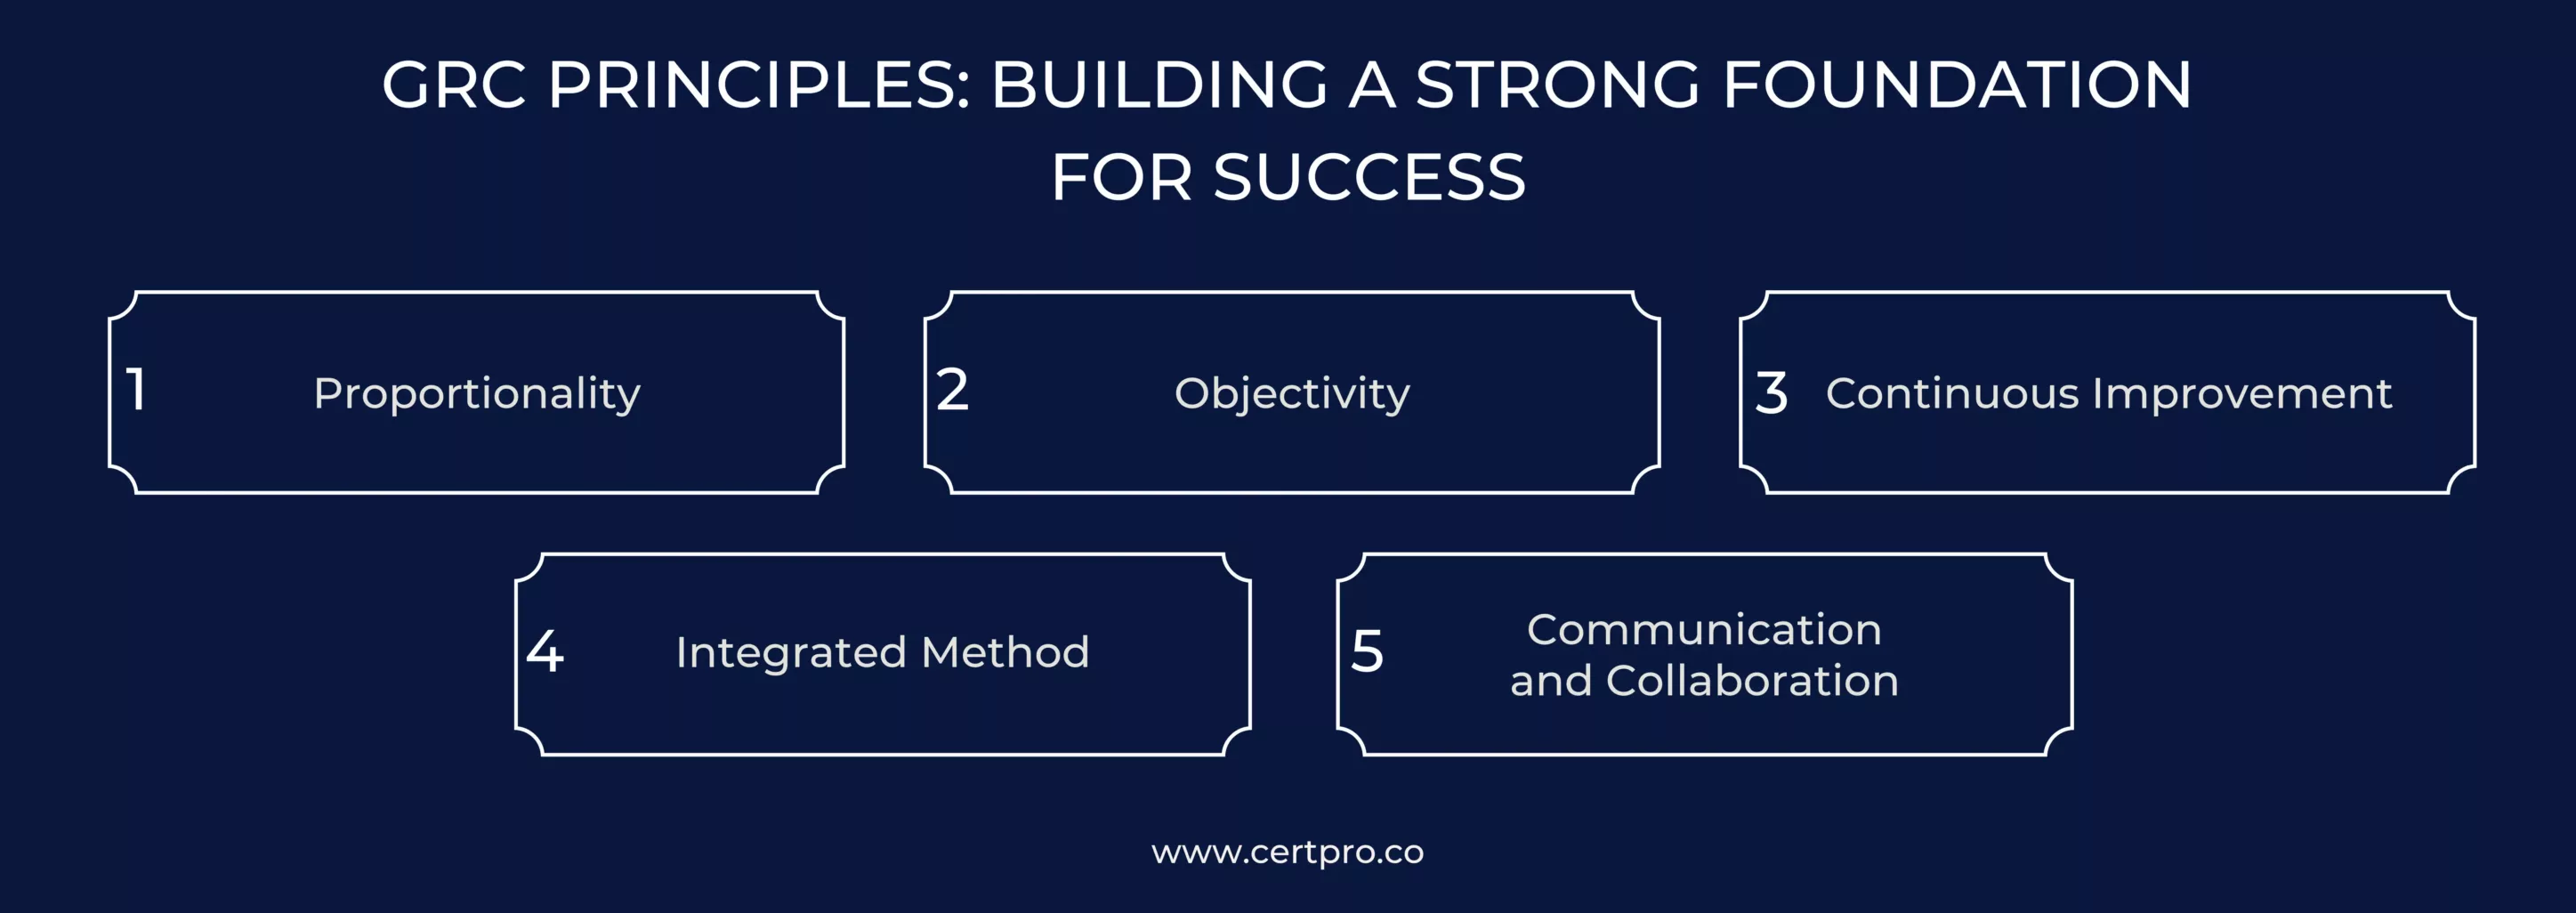 GRC PRINCIPLES BUILDING A STRONG FOUNDATION FOR SUCCESS